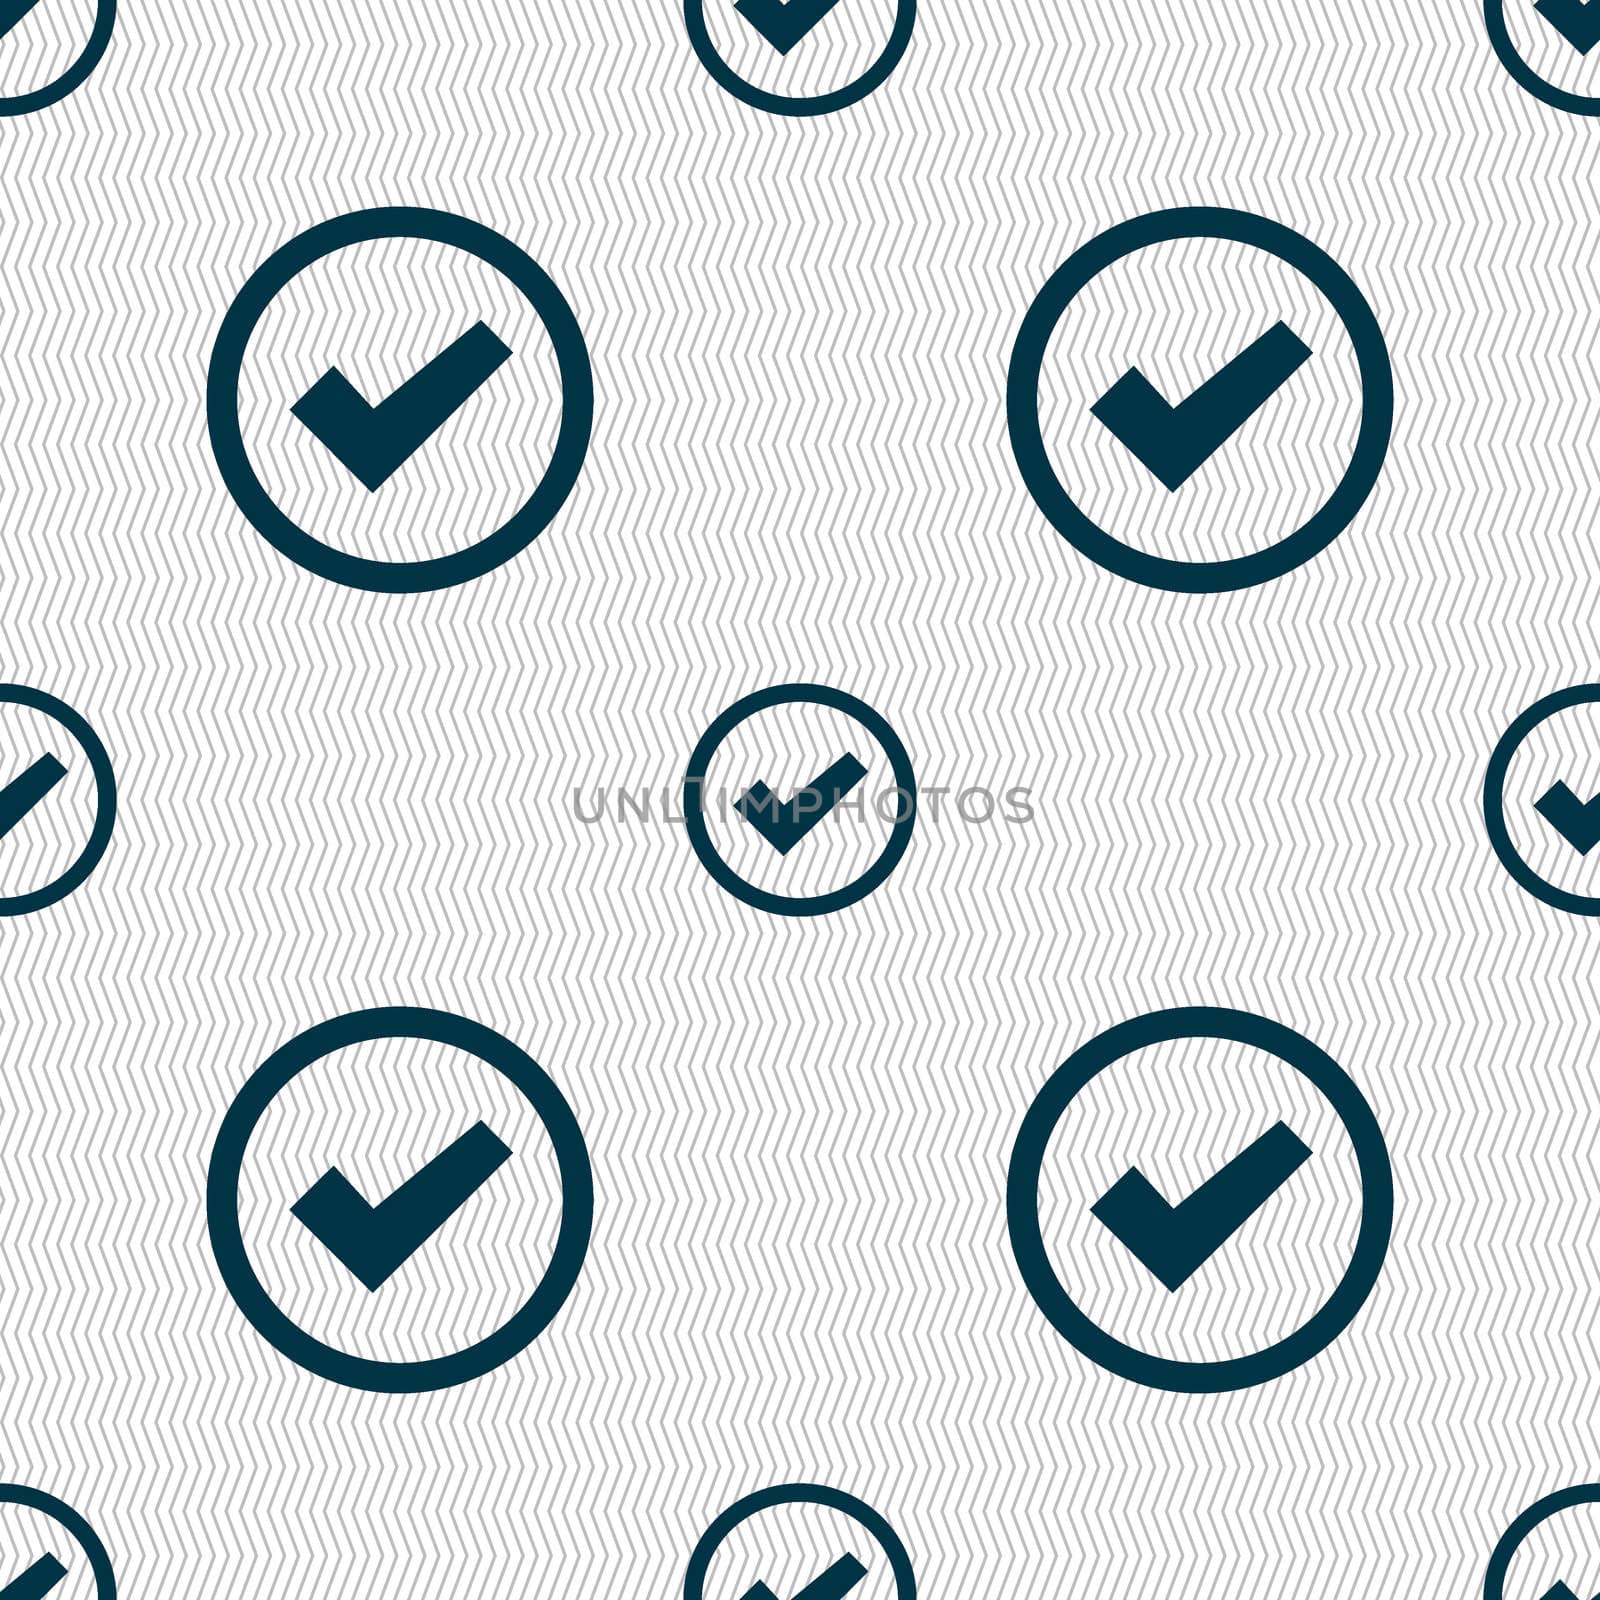 Check mark sign icon . Confirm approved symbol. Seamless abstract background with geometric shapes. illustration